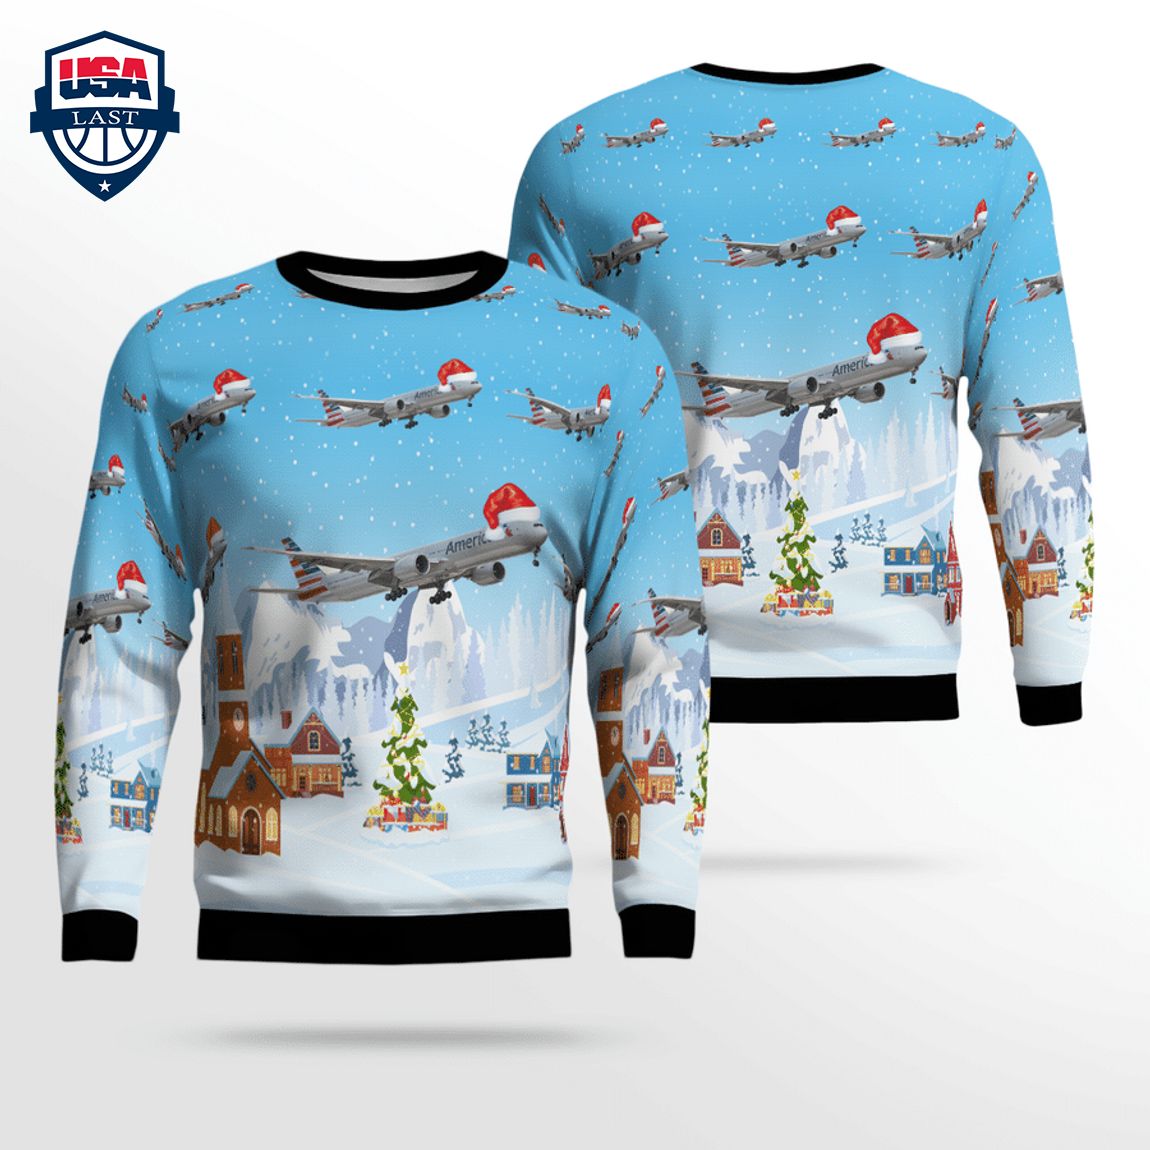 United Airlines Boeing 777-300ER 3D Christmas Sweater – Saleoff